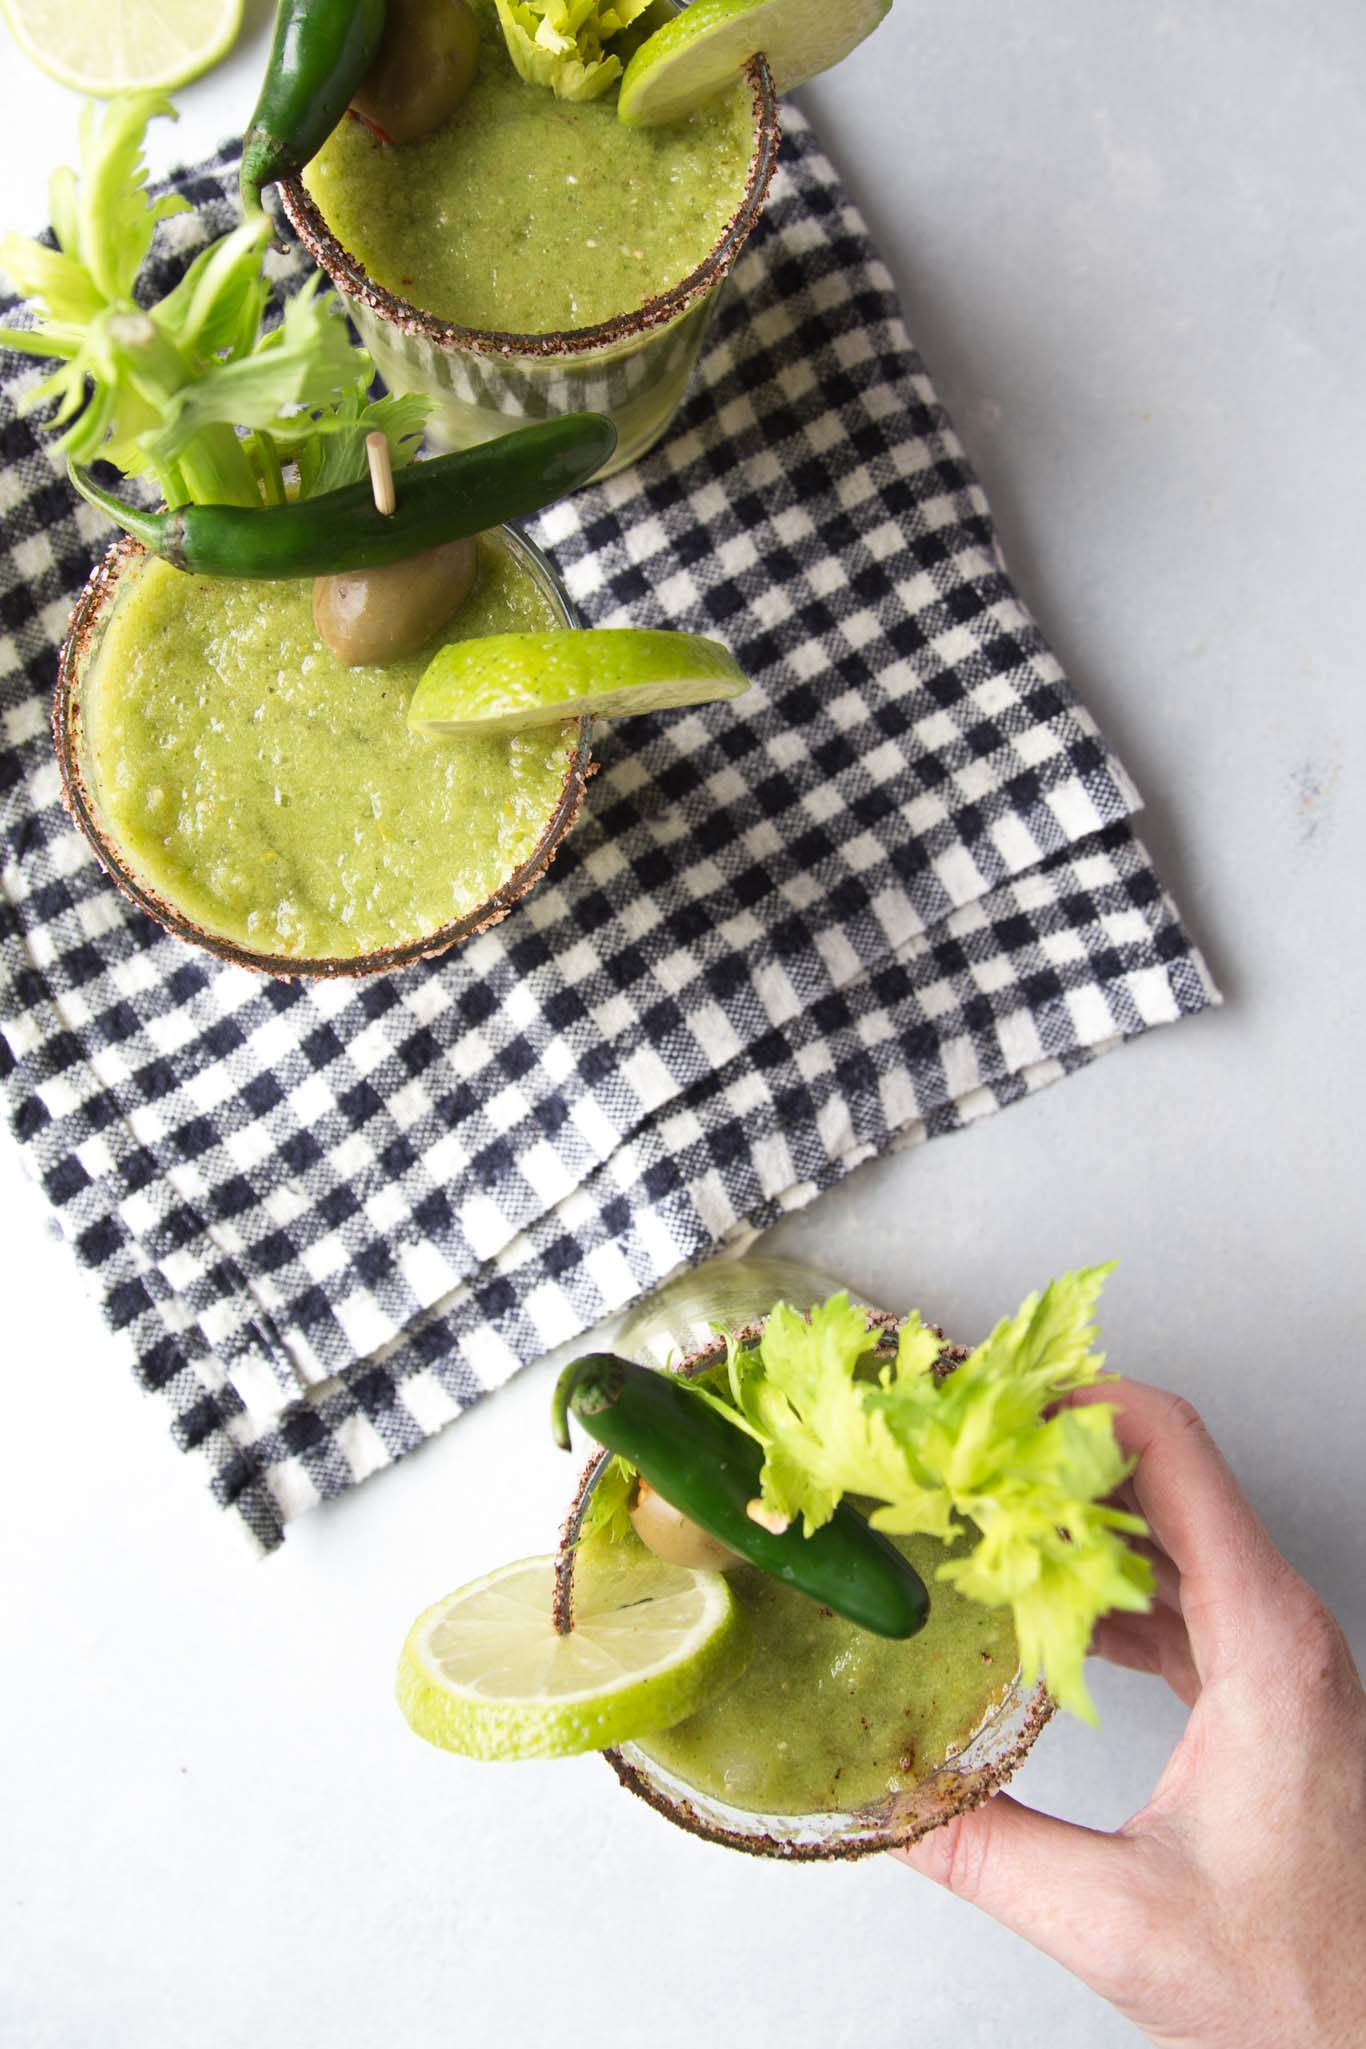 Green Bloody Mary (Tomatillo Bloody Mary) via Platings and Pairings